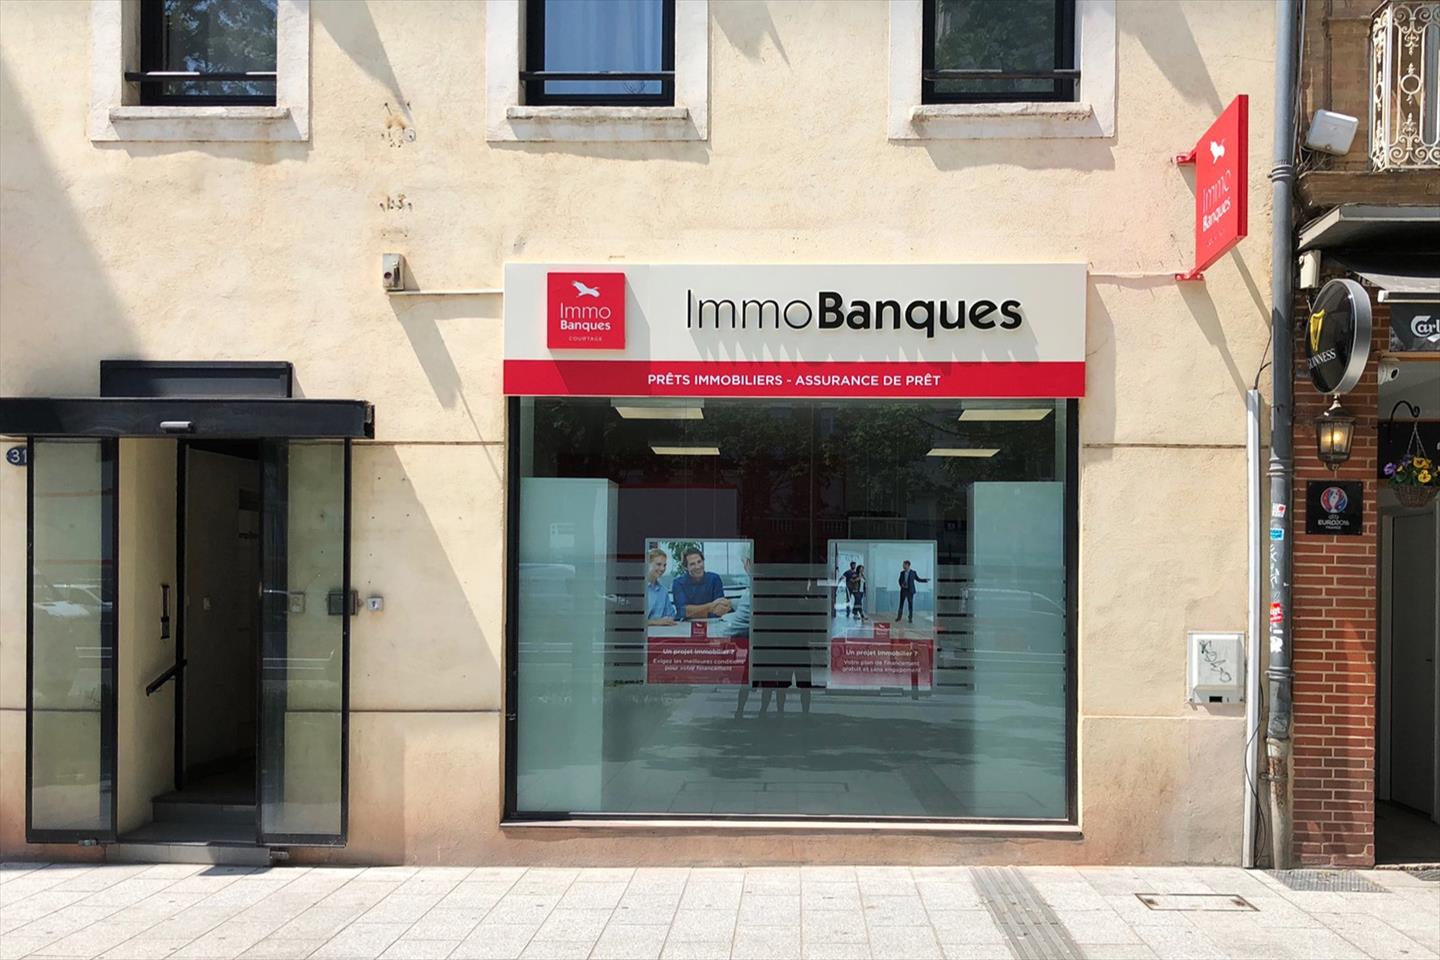 ImmoBanques emploi